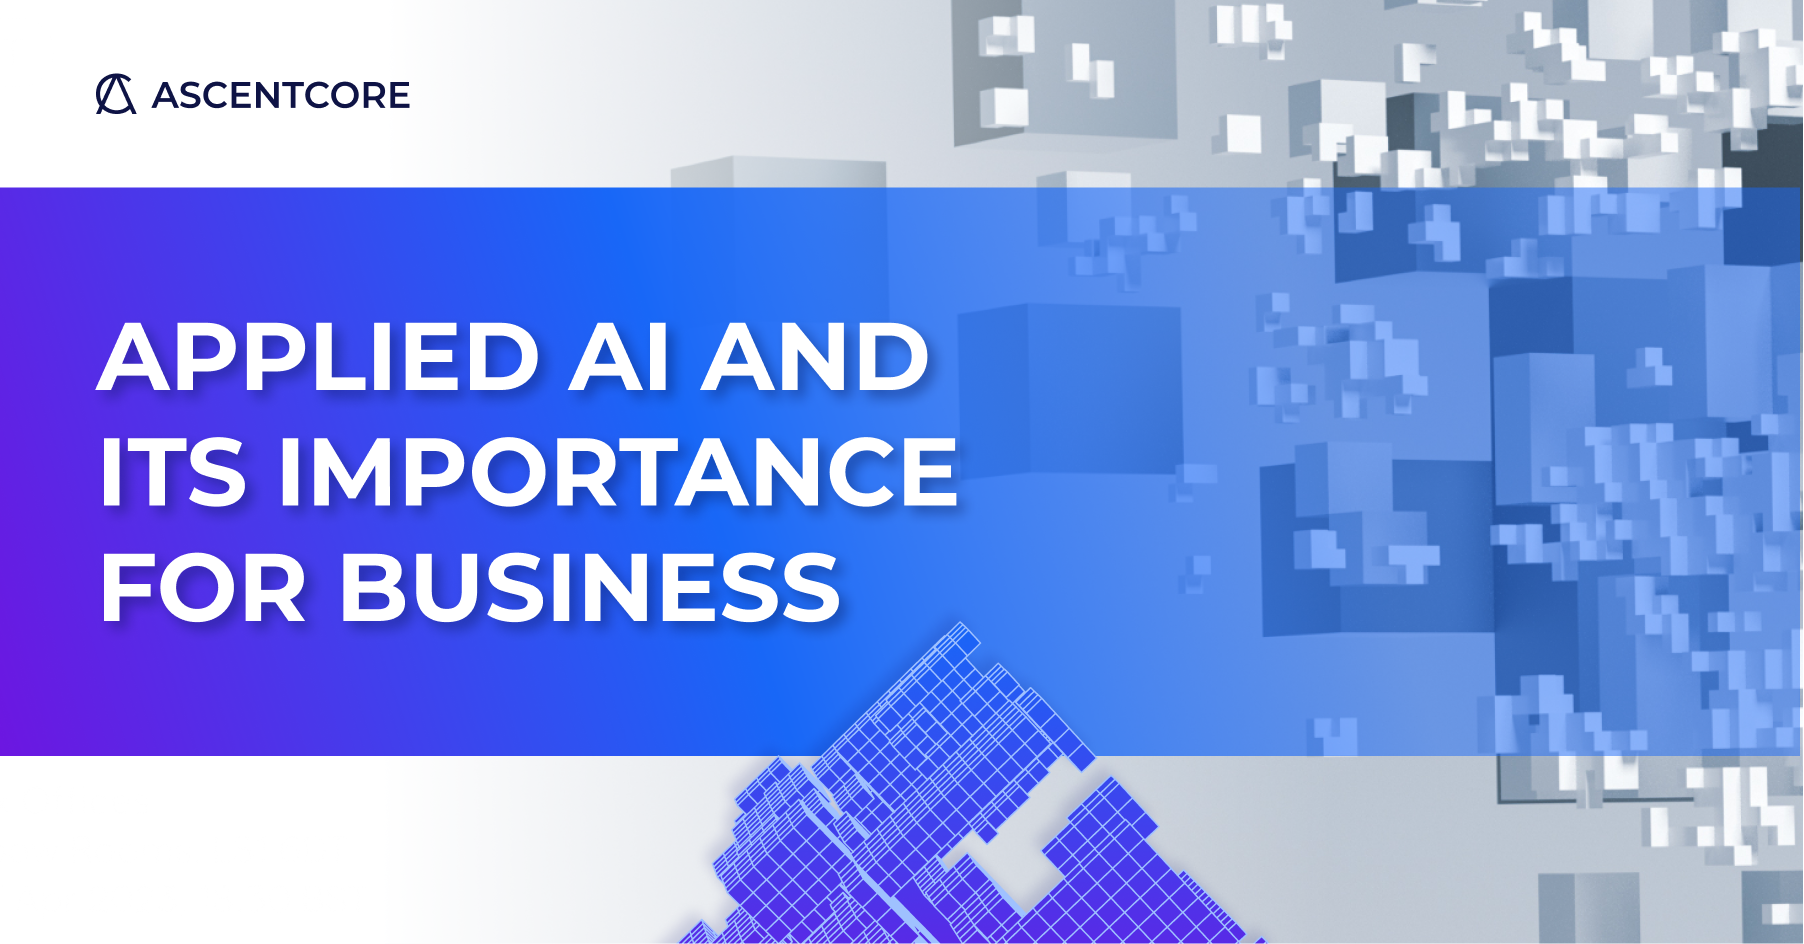 AscentCore applied AI and it's importance for business blogpost cover